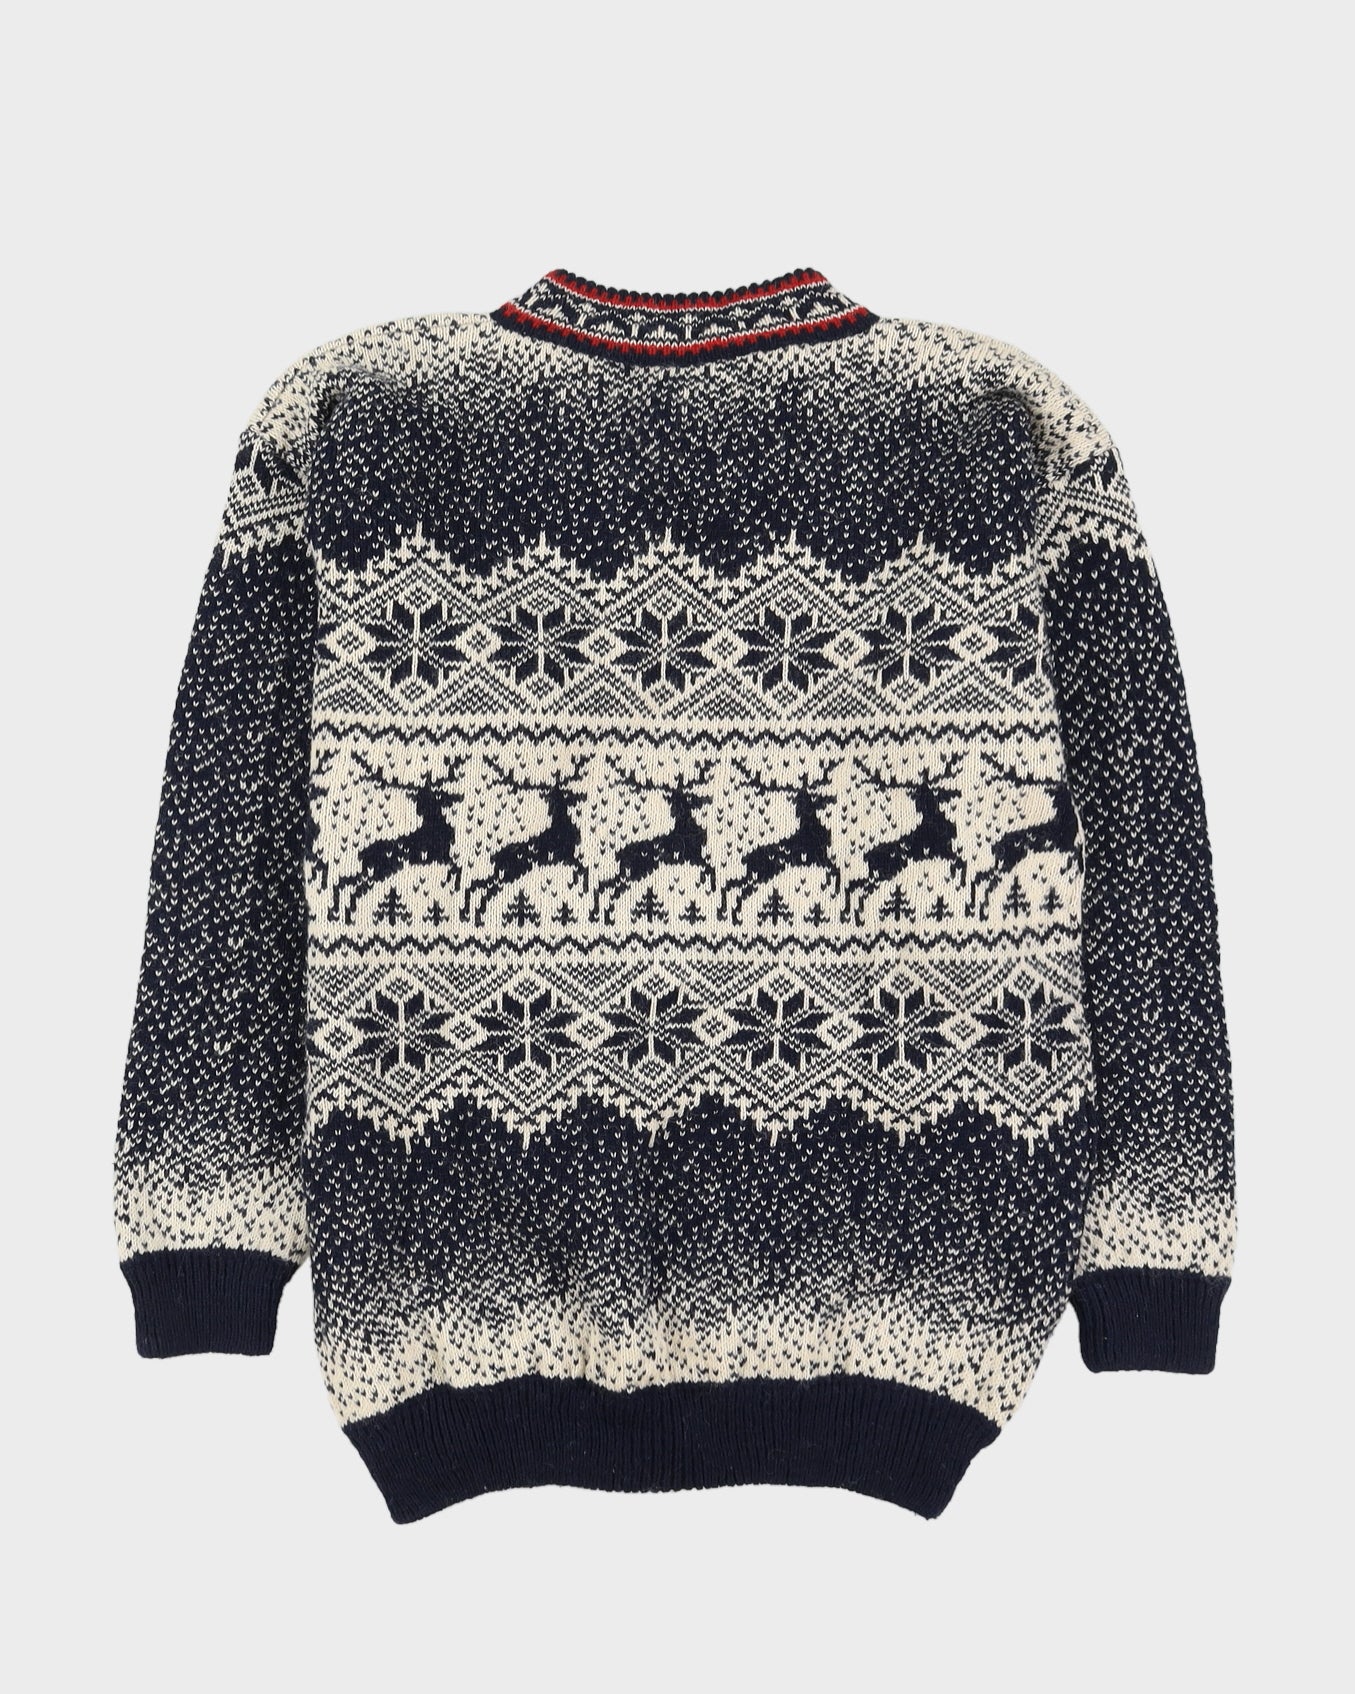 Scandi Style Patterned Knitted Jumper - L